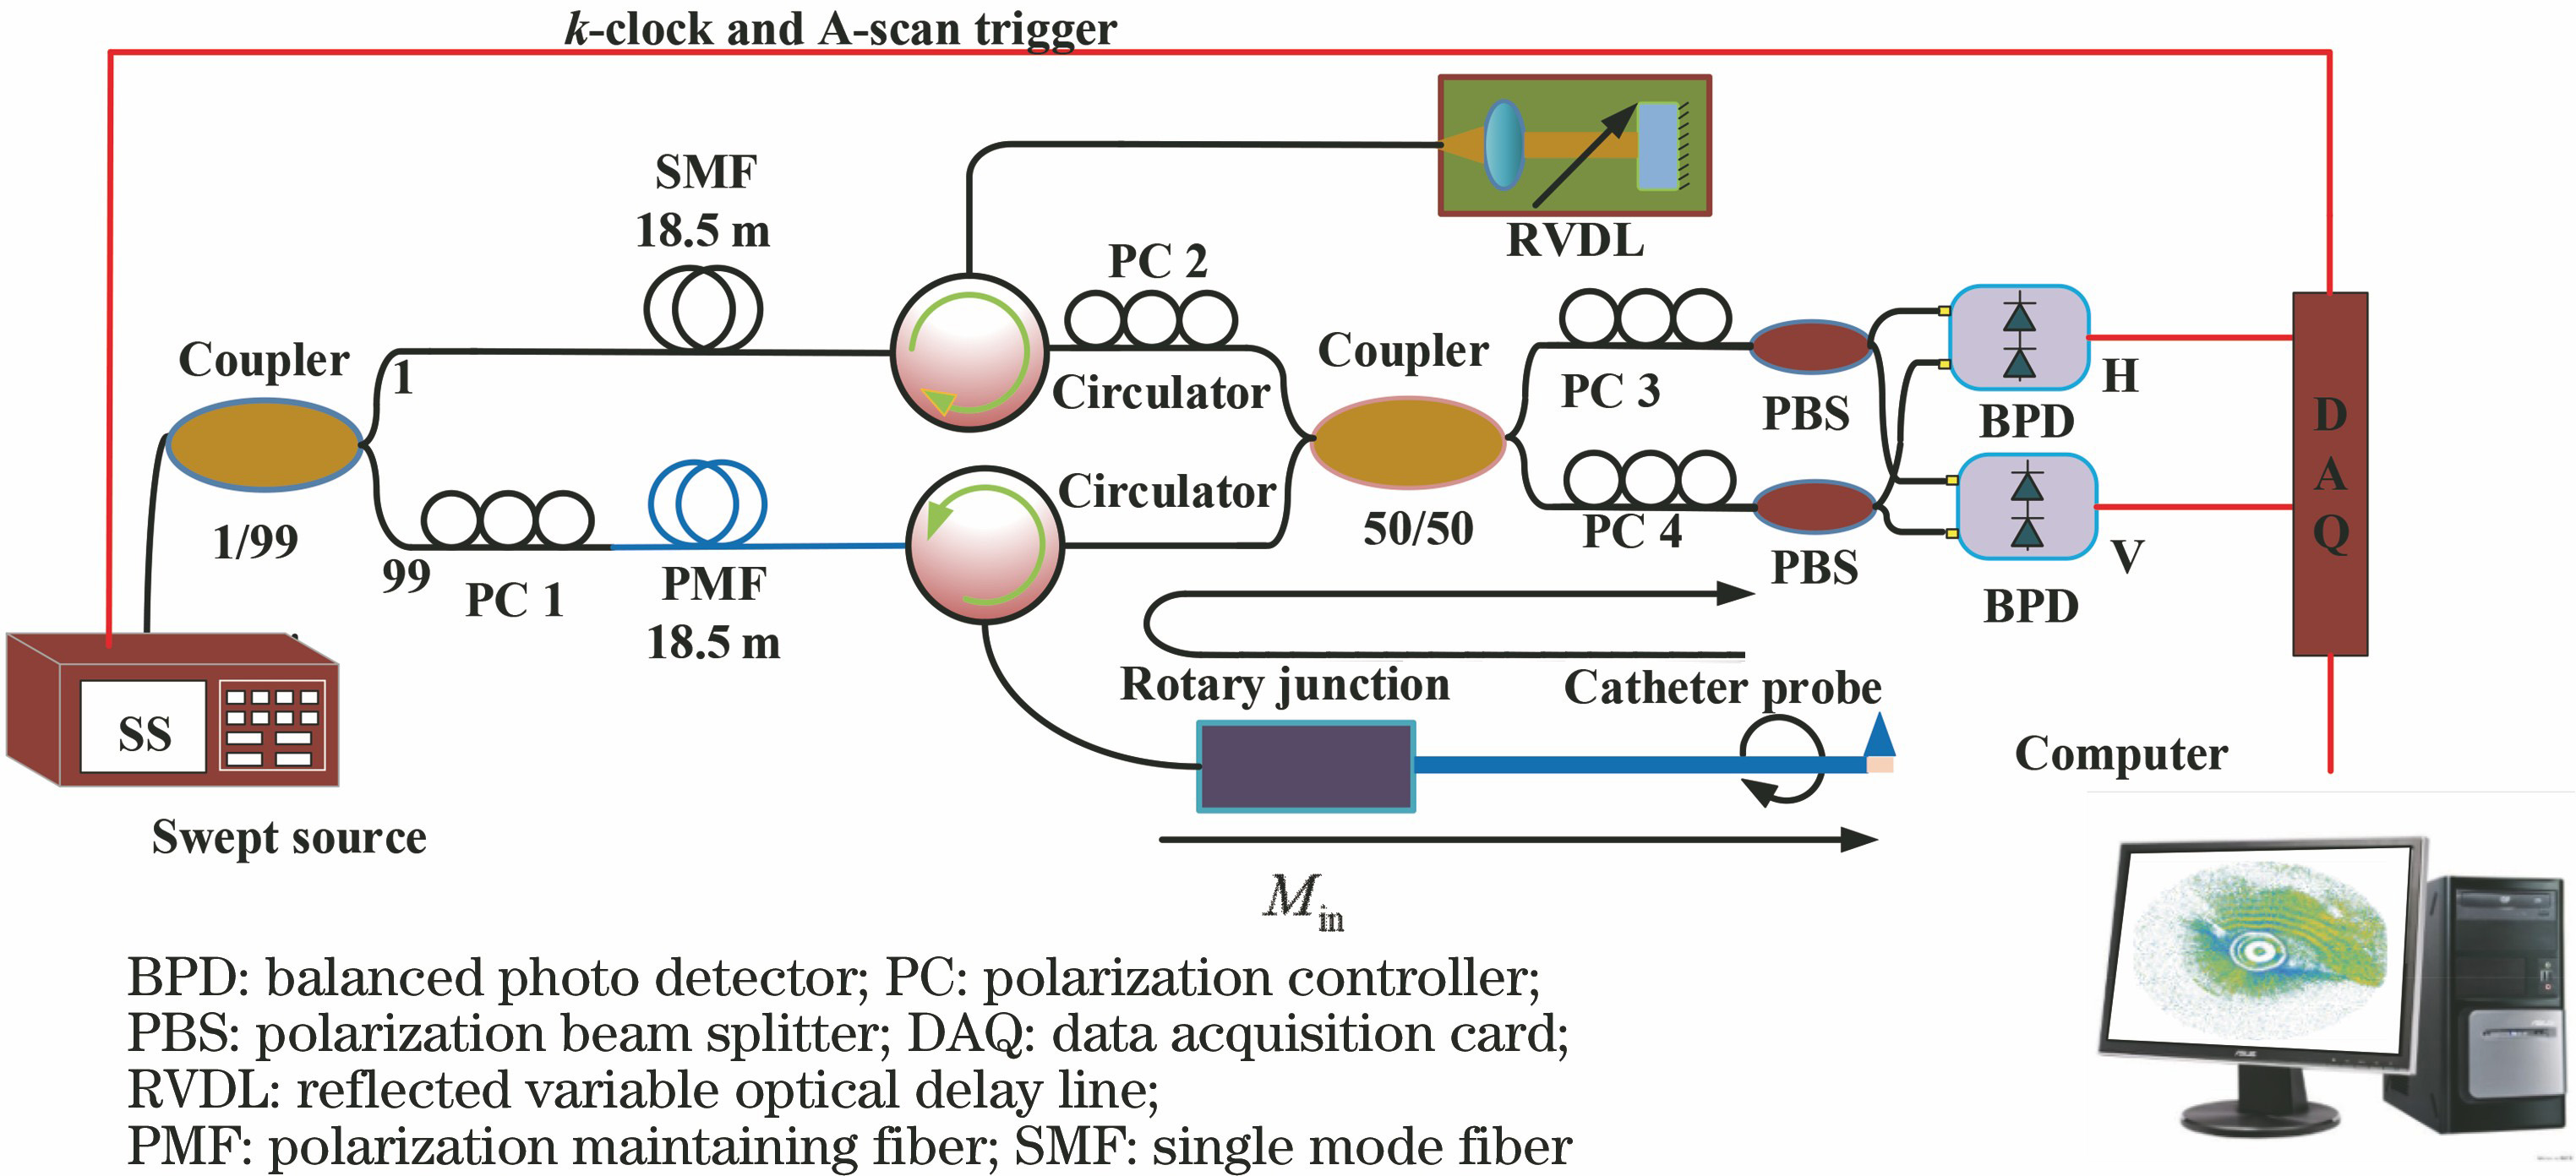 Schematic diagram of catheter based PS-OCT system